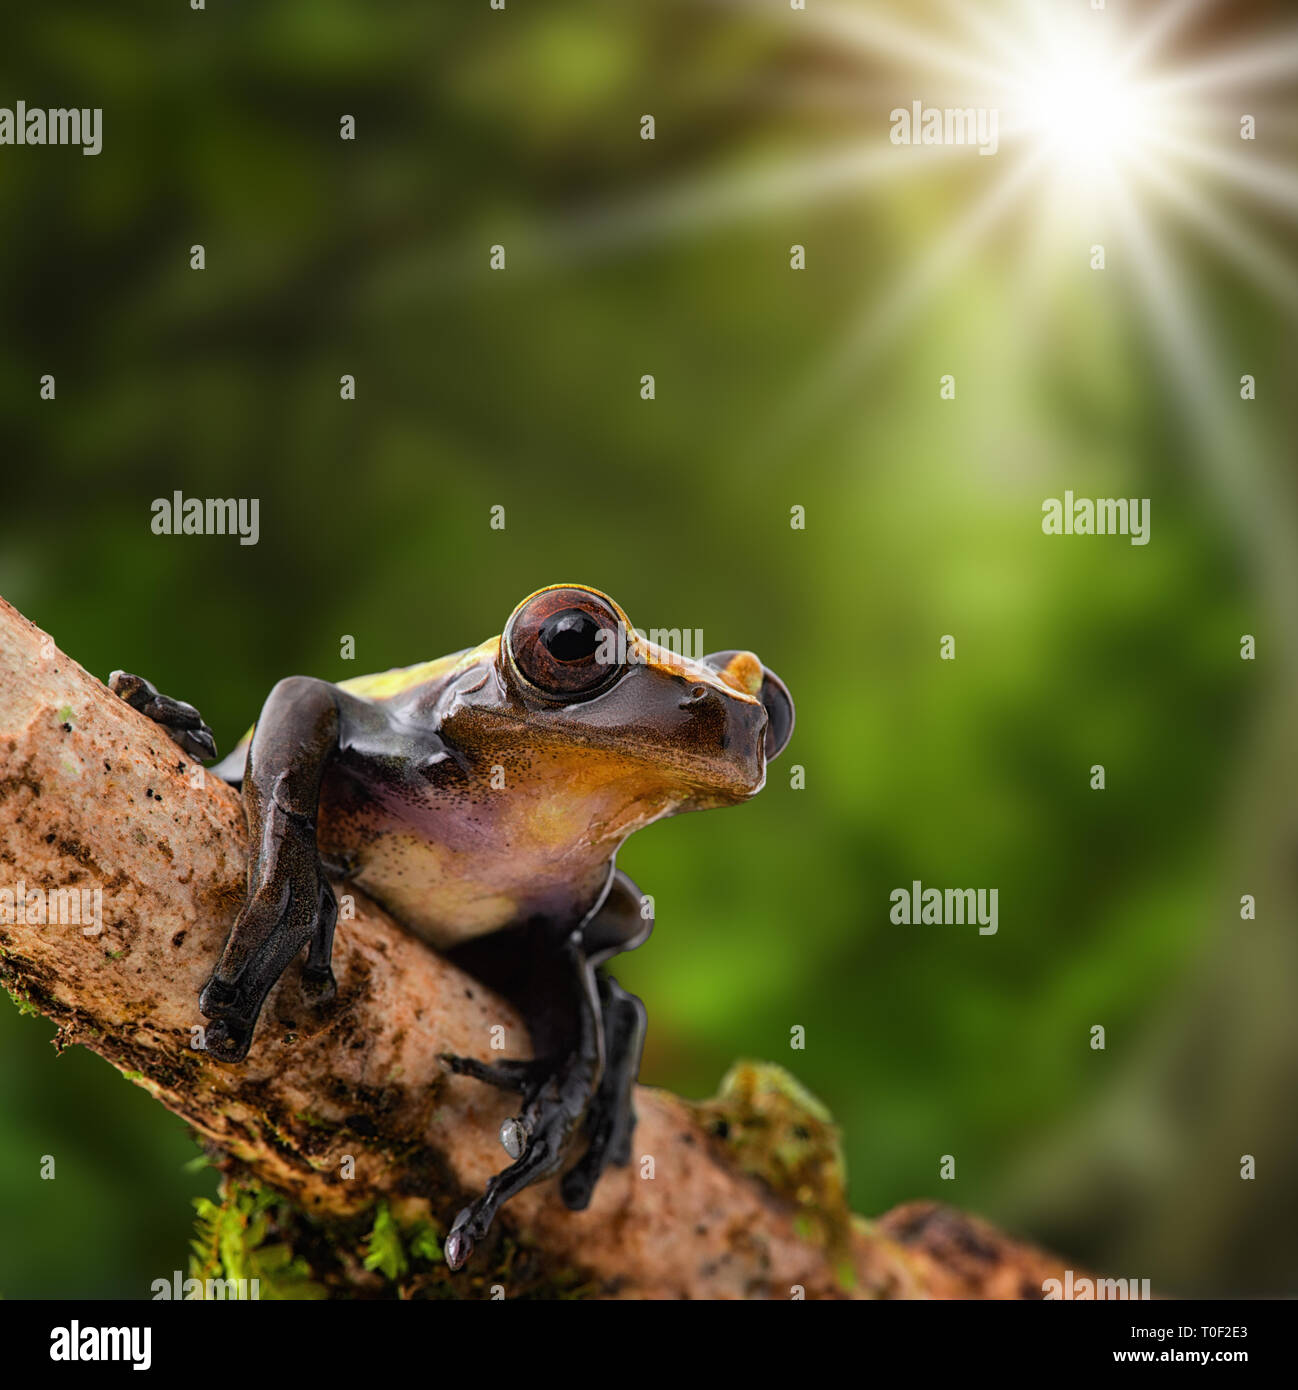 Tropical tree frog basking in the sun, Dendropsophus manonegra.   A rain forest animal living in the Amazon jungle. Stock Photo